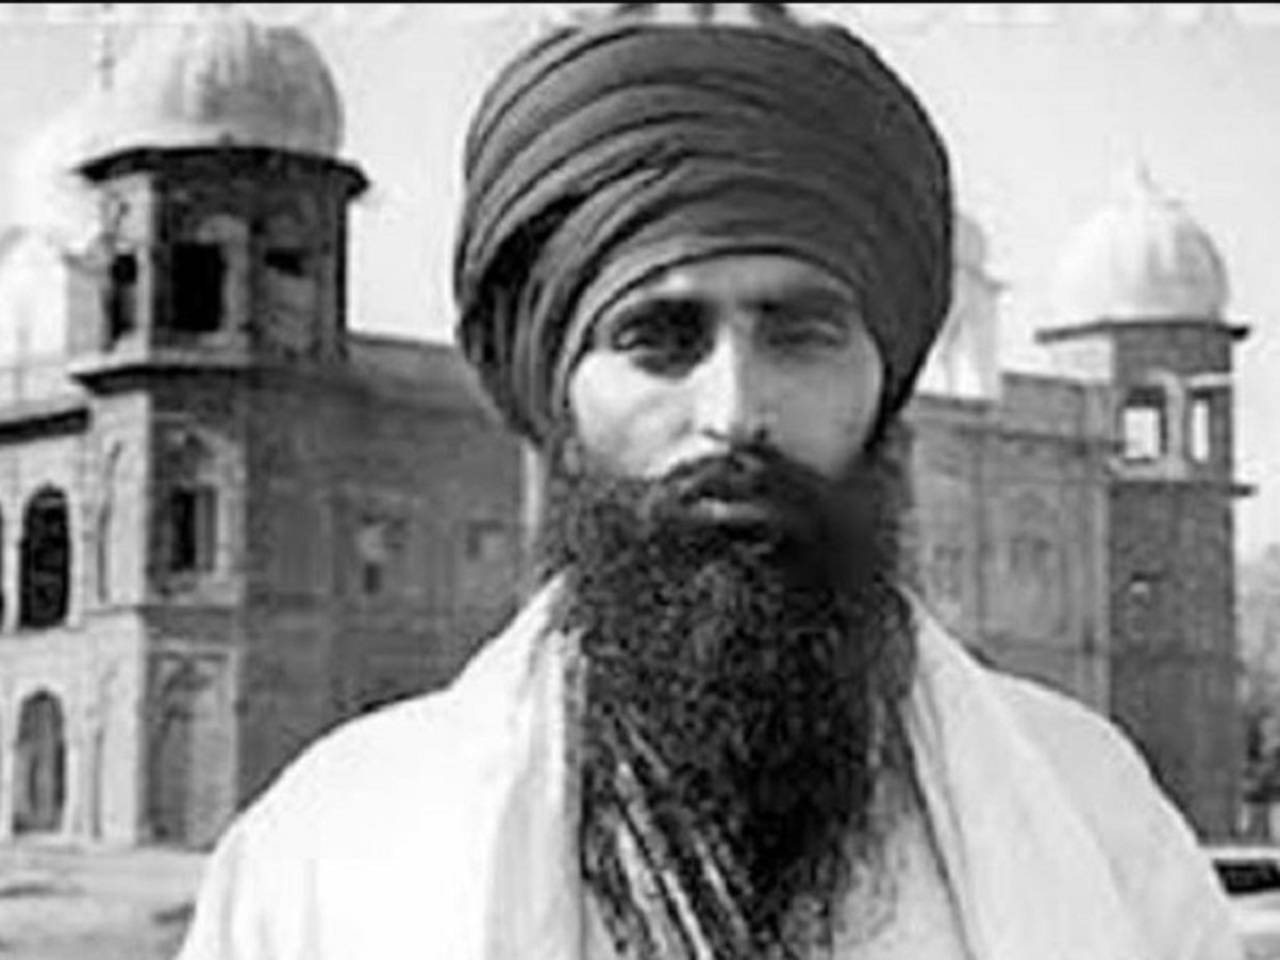 US library removes memorial featuring portrait of Bhindranwale ...